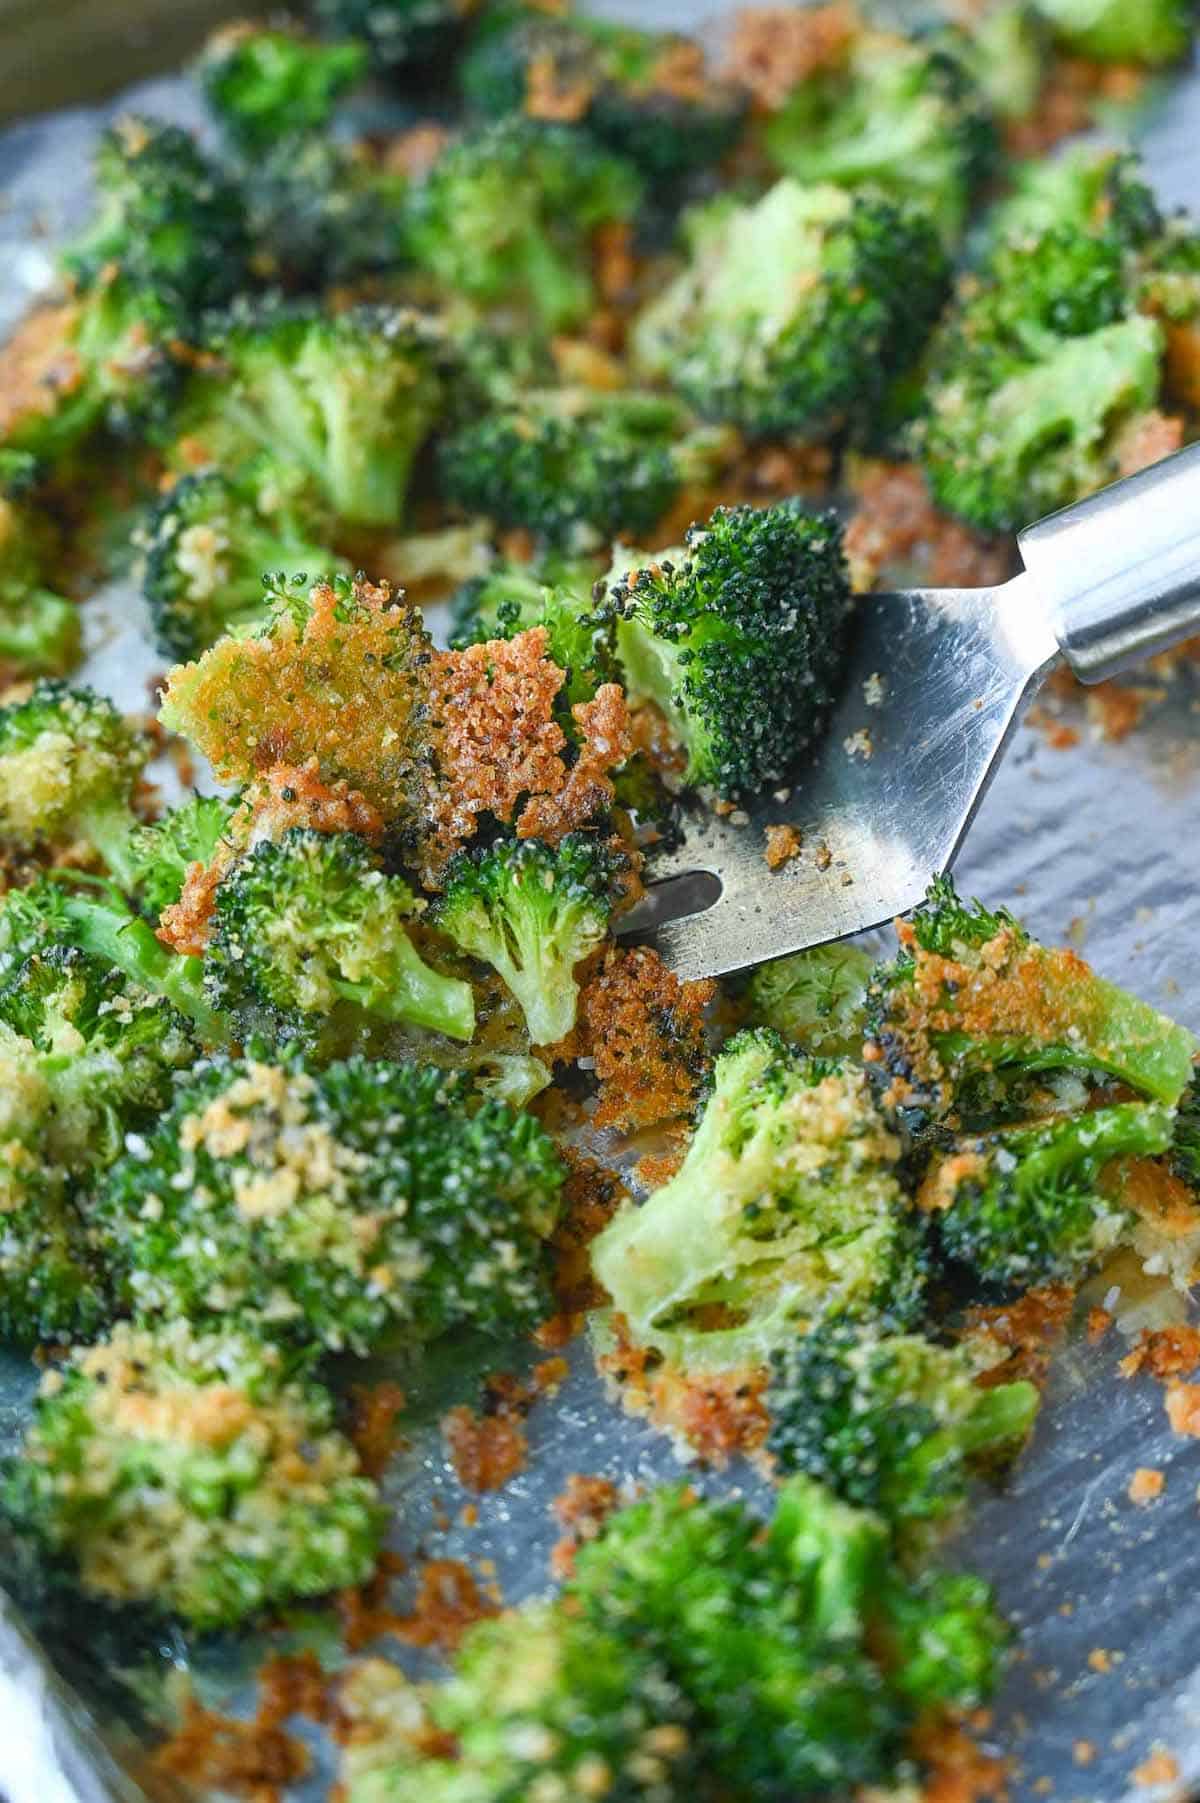 A spatula scooping up some roasted broccoli.